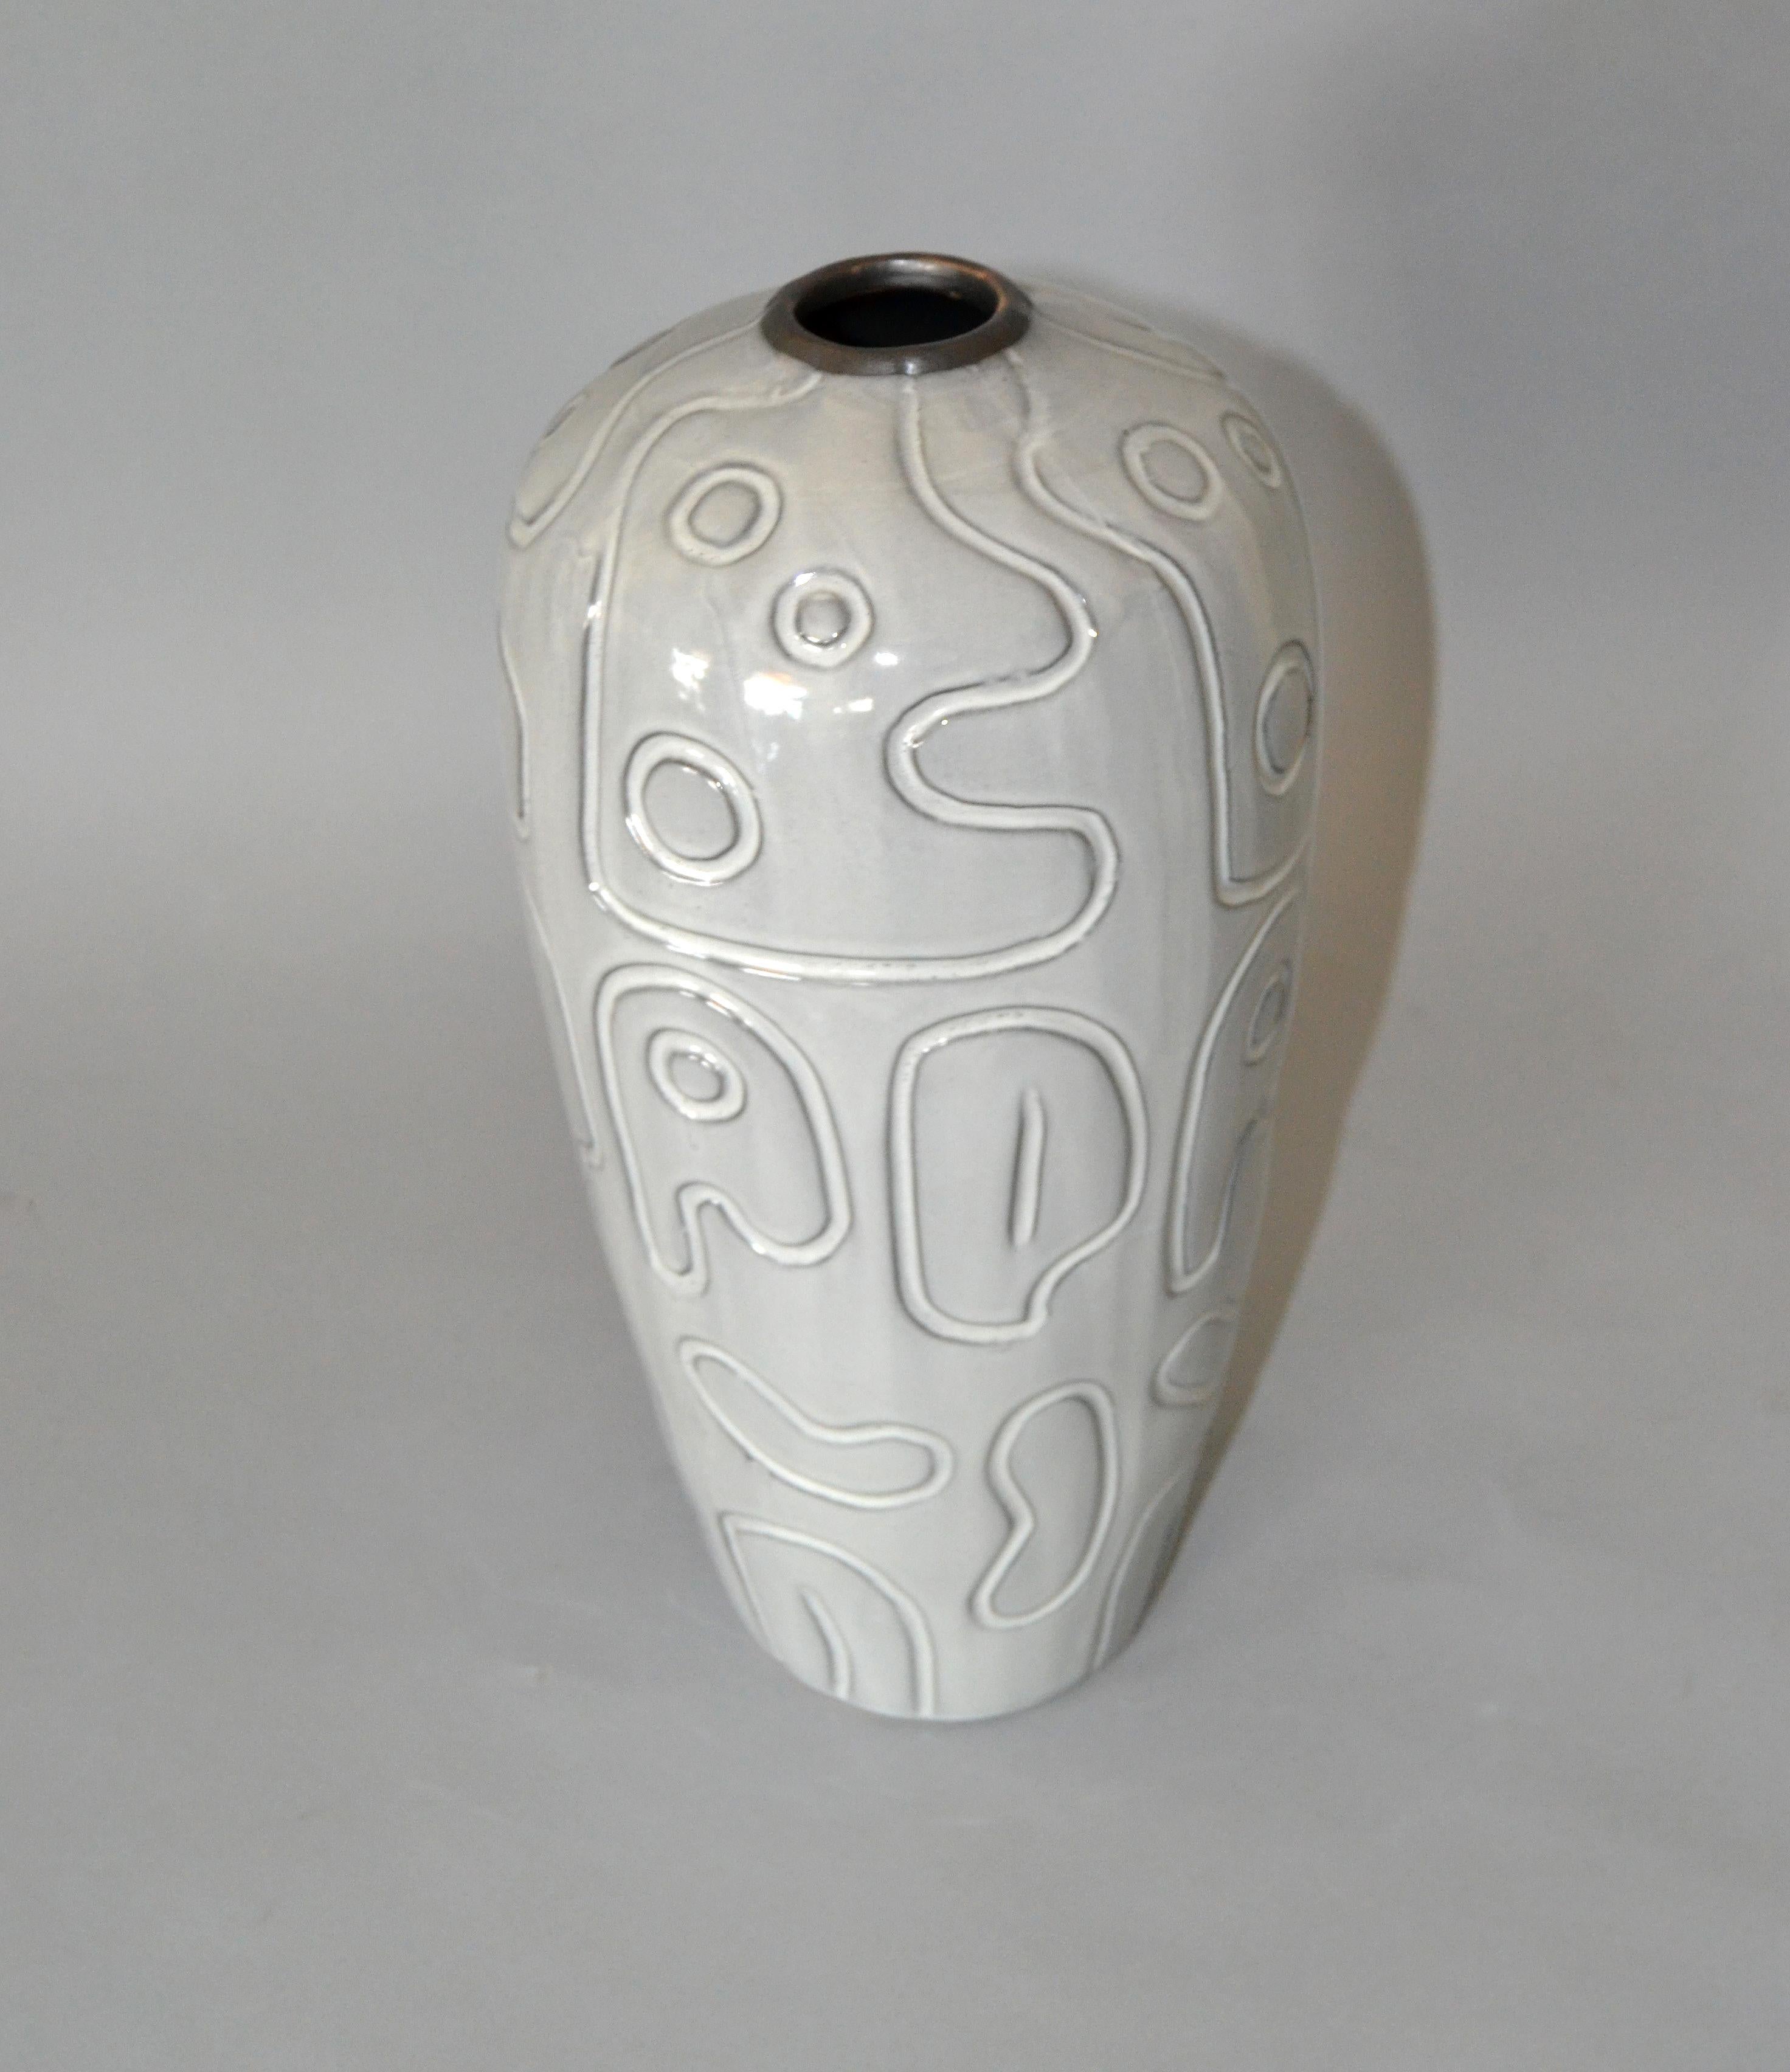 Charming modern glazed pottery vase in gray.
It is a studio piece and has no markings.